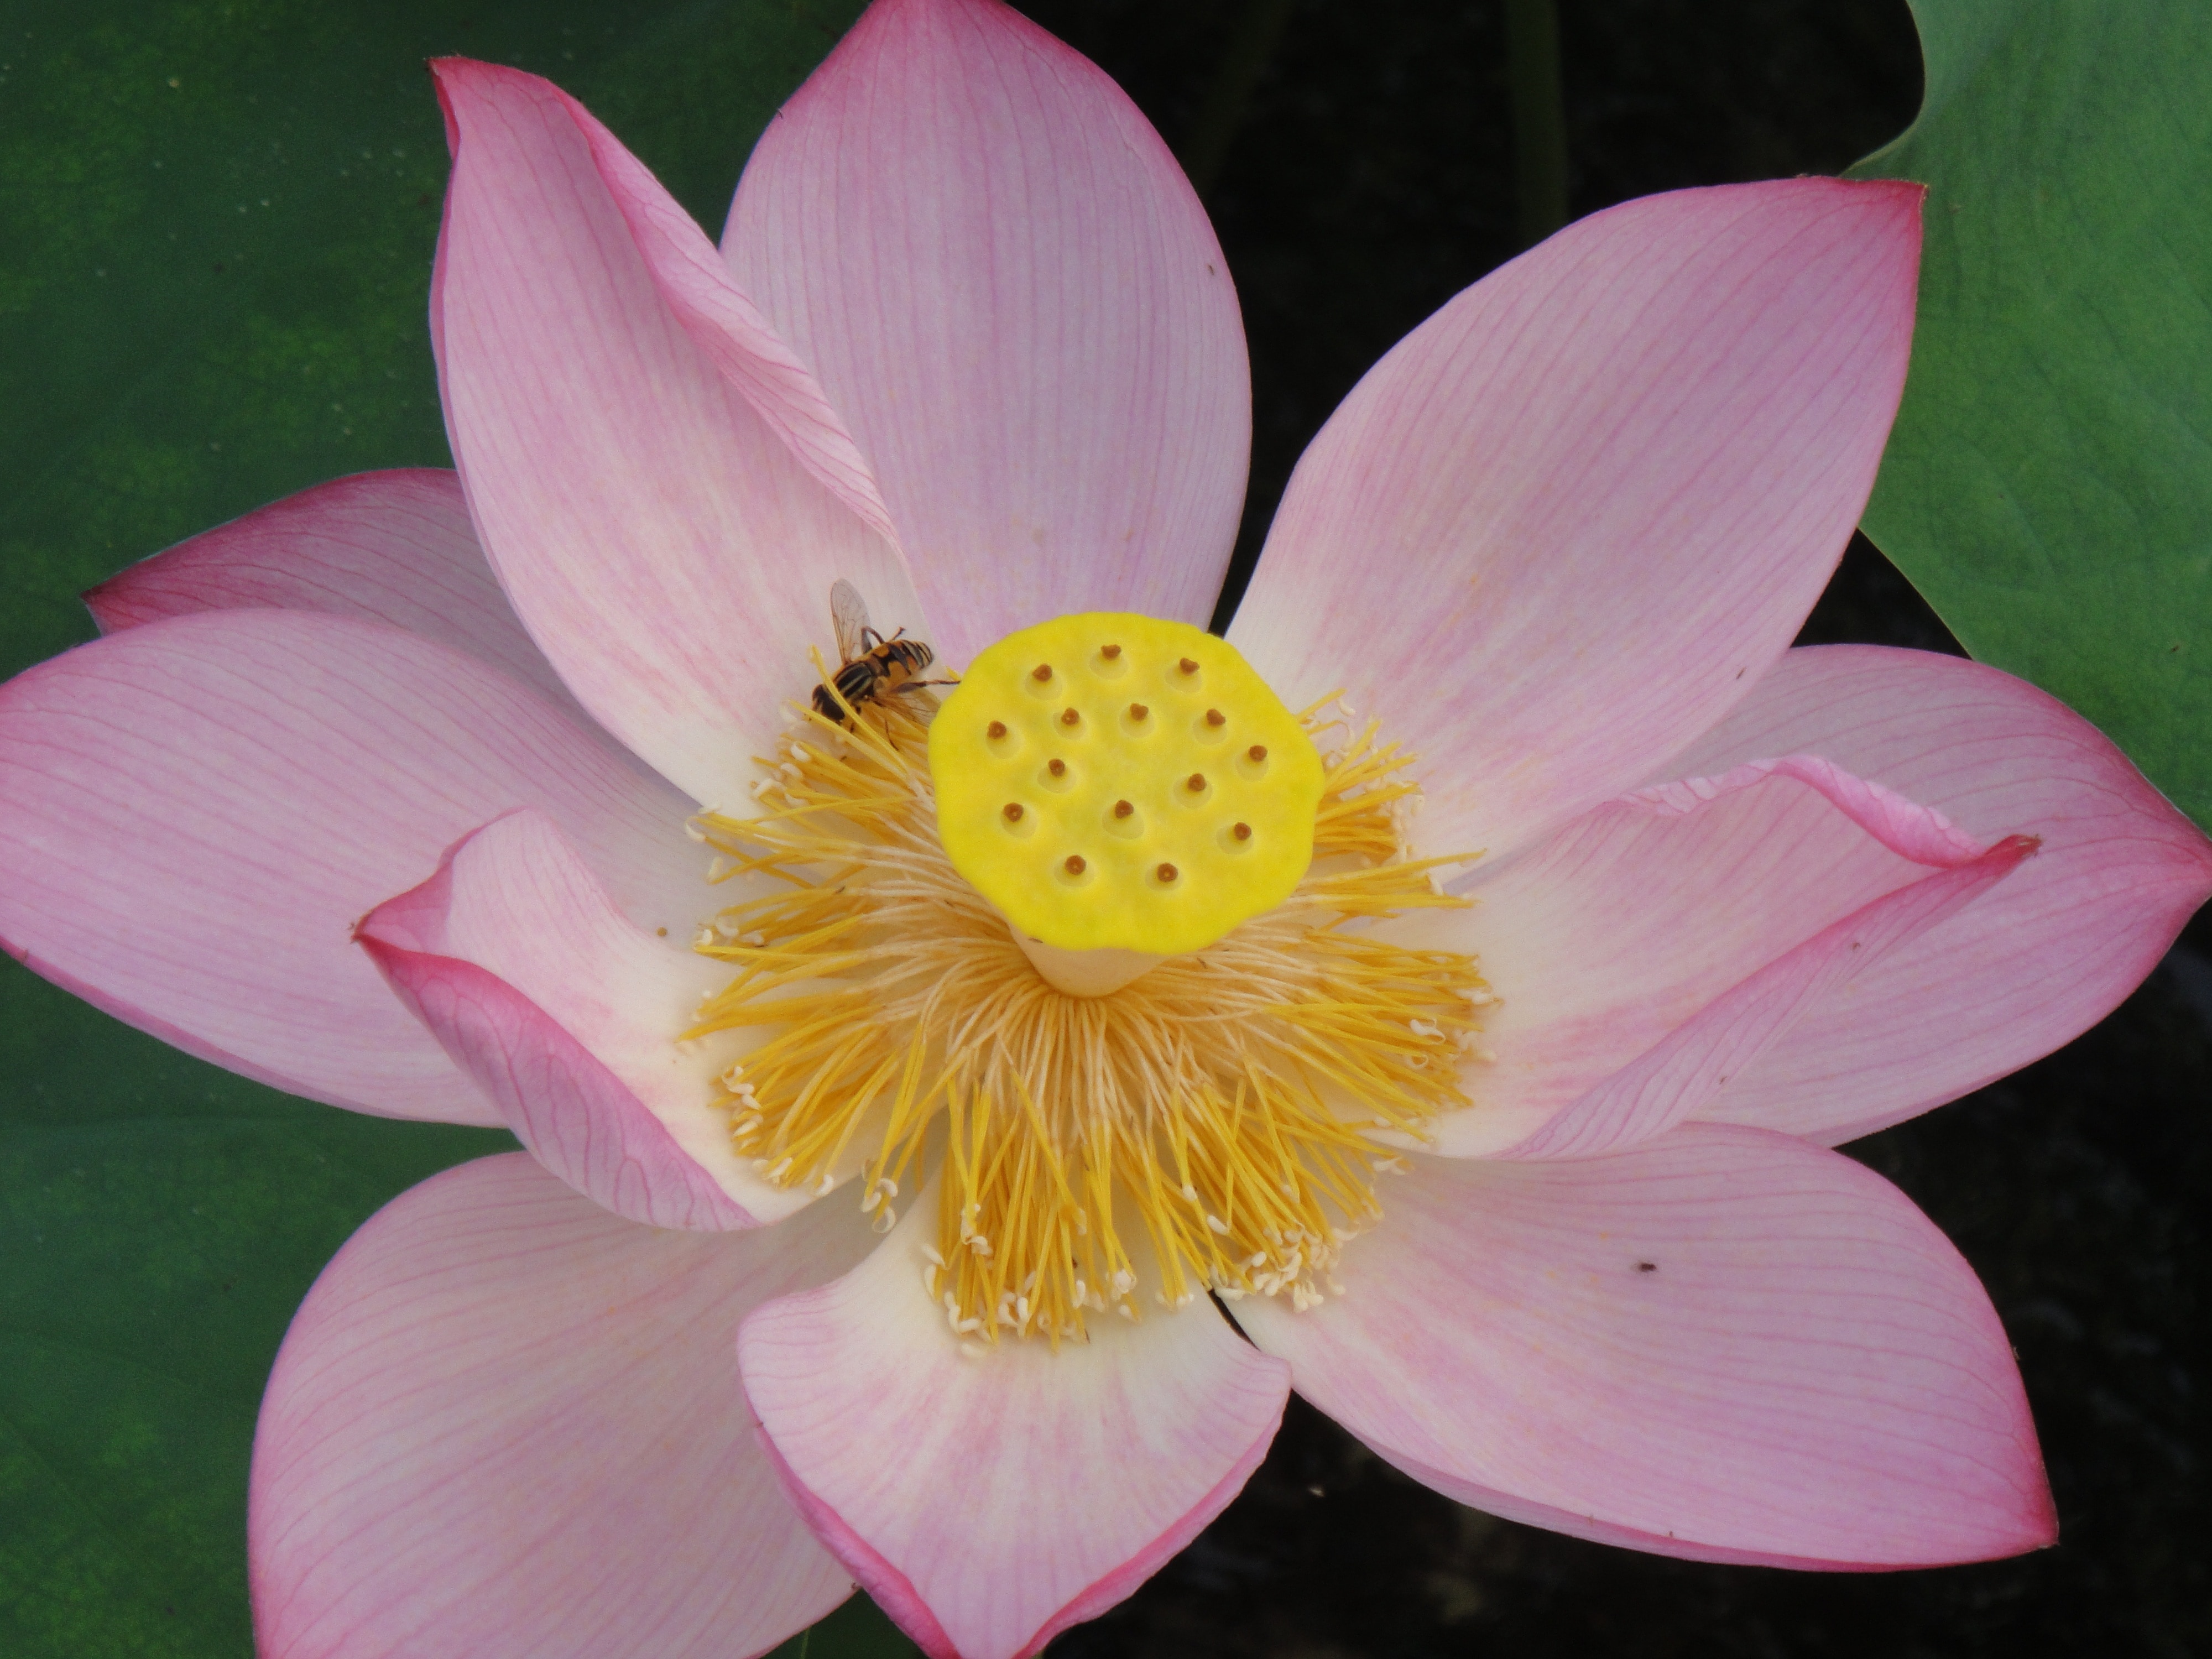 yellow and pink petal flower